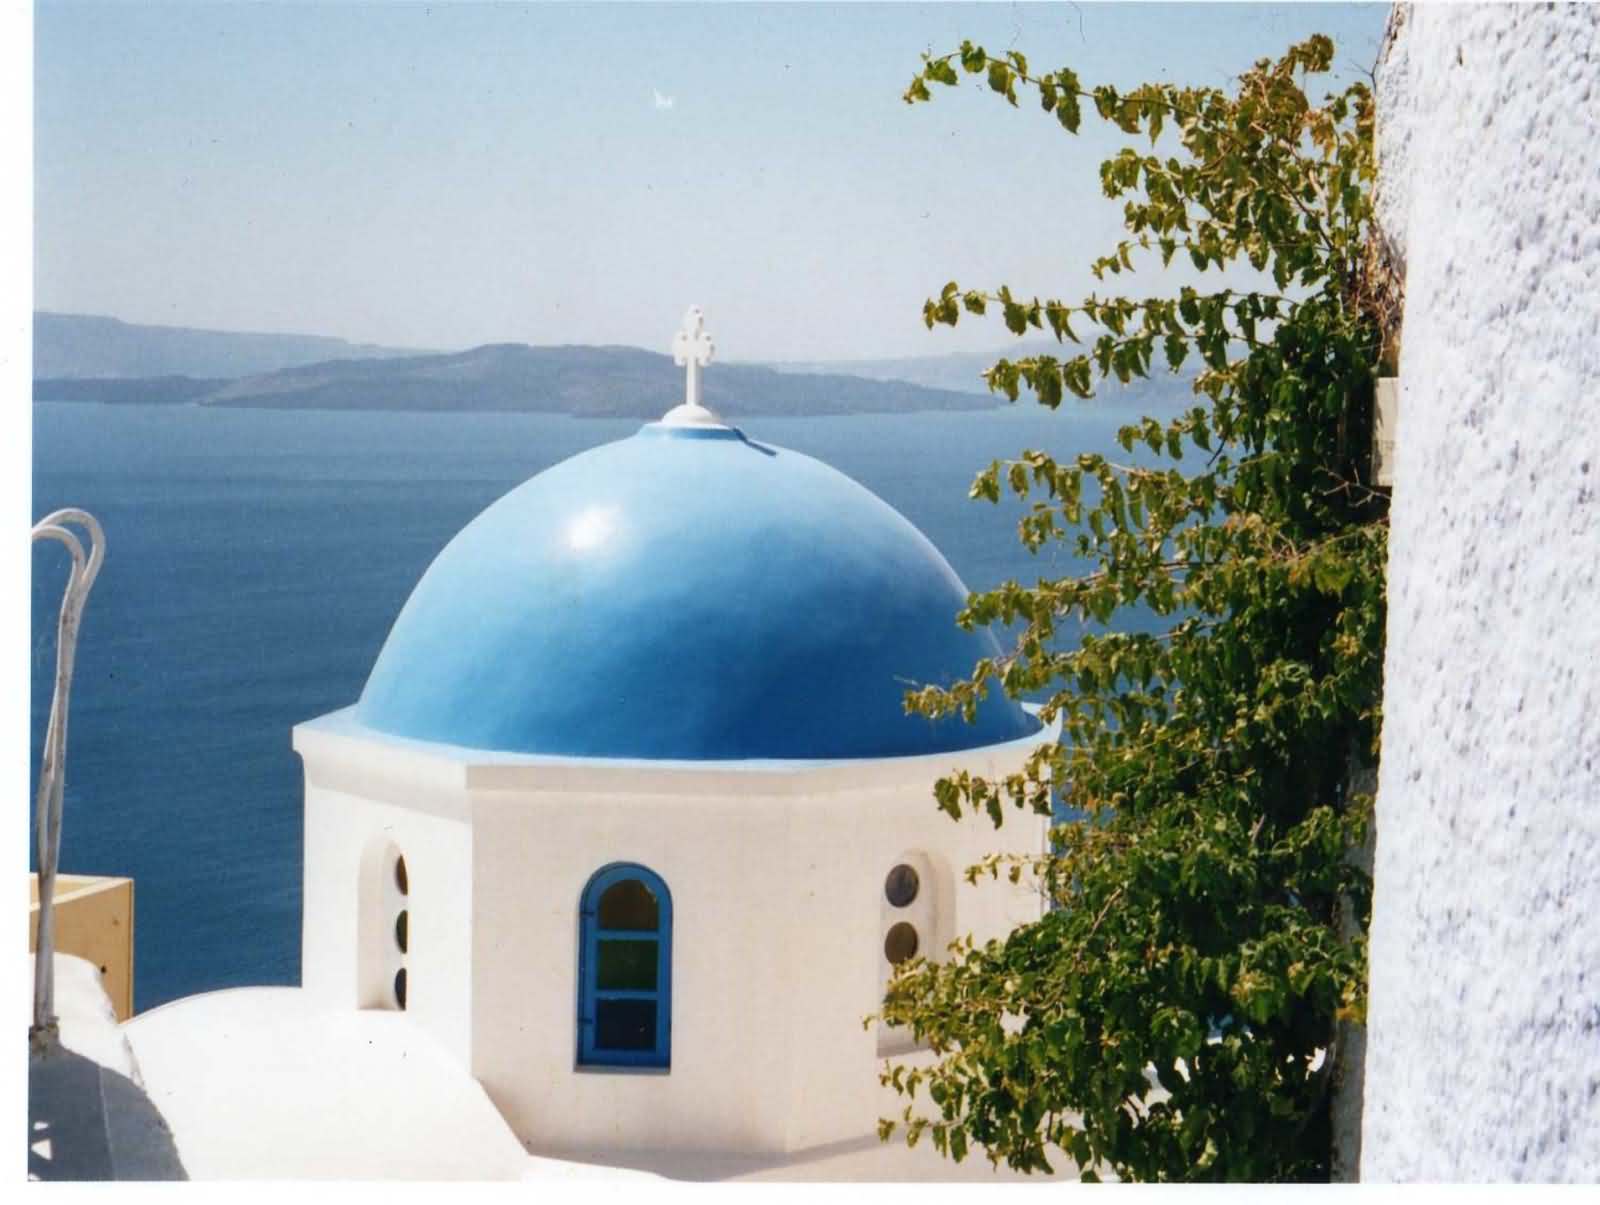 Dome Of Blue Domed Church In Greece